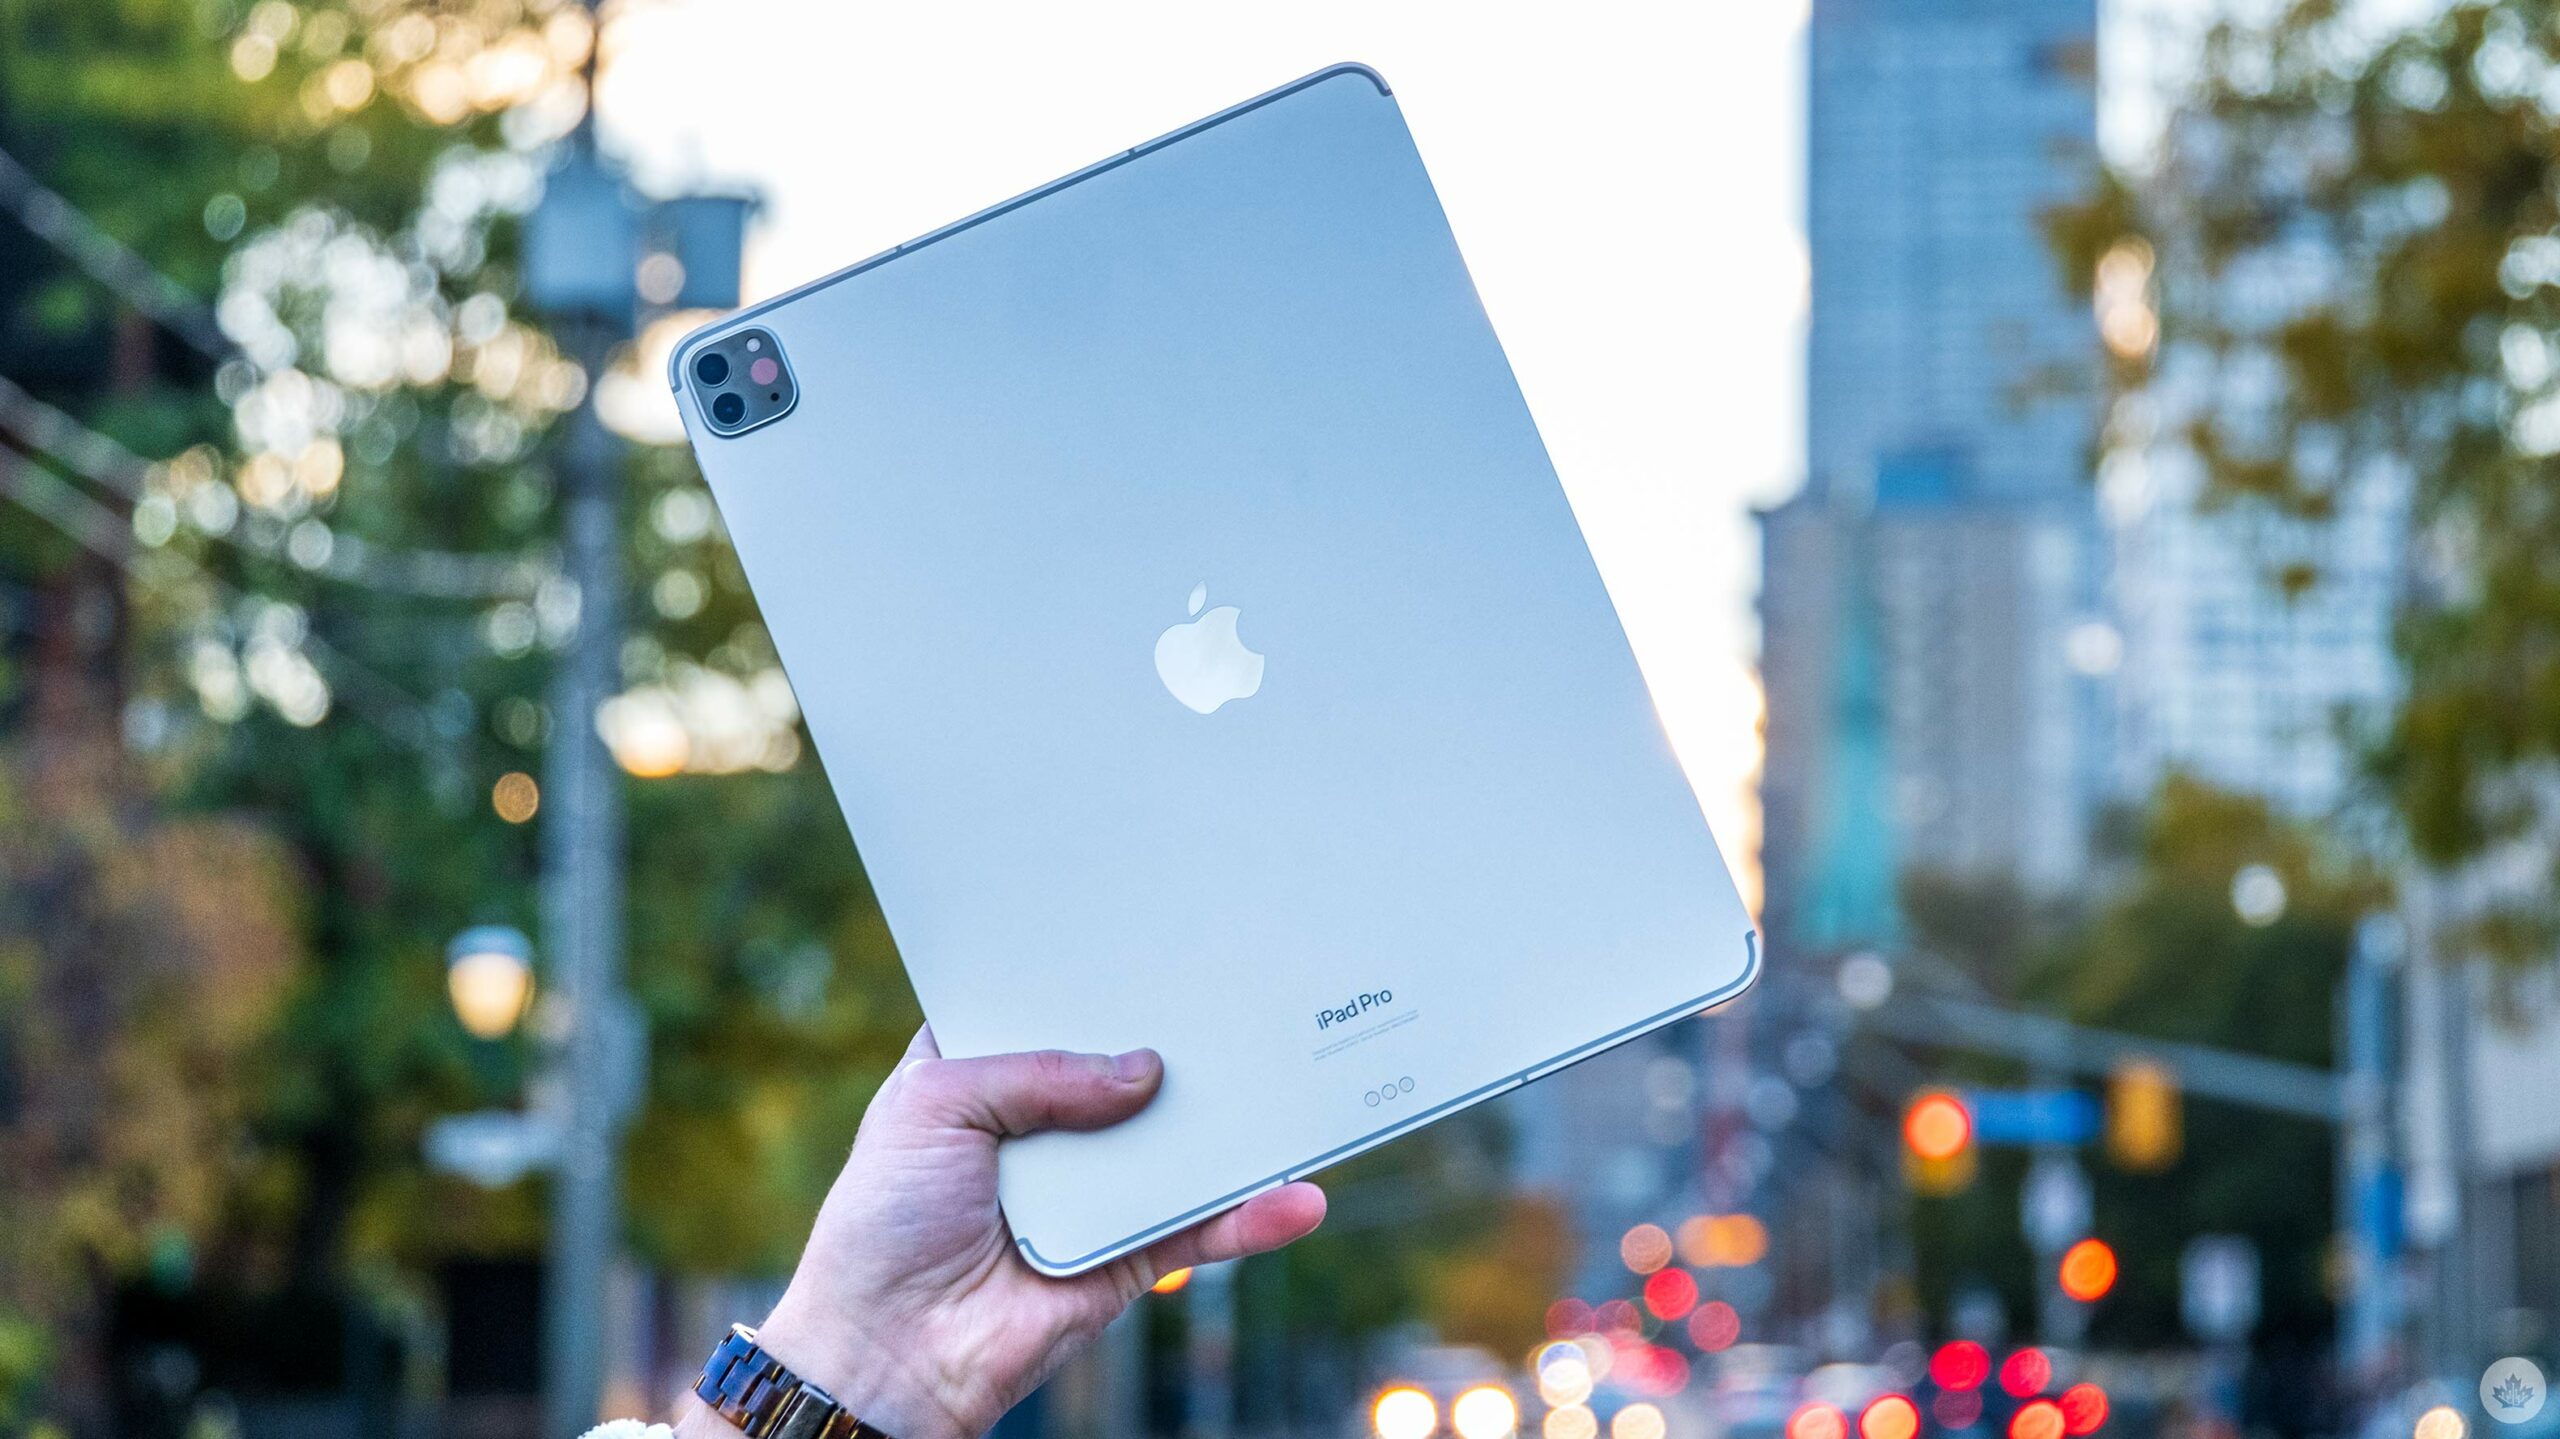 Gurman: New iPad Pro still expected later this year - 9to5Mac